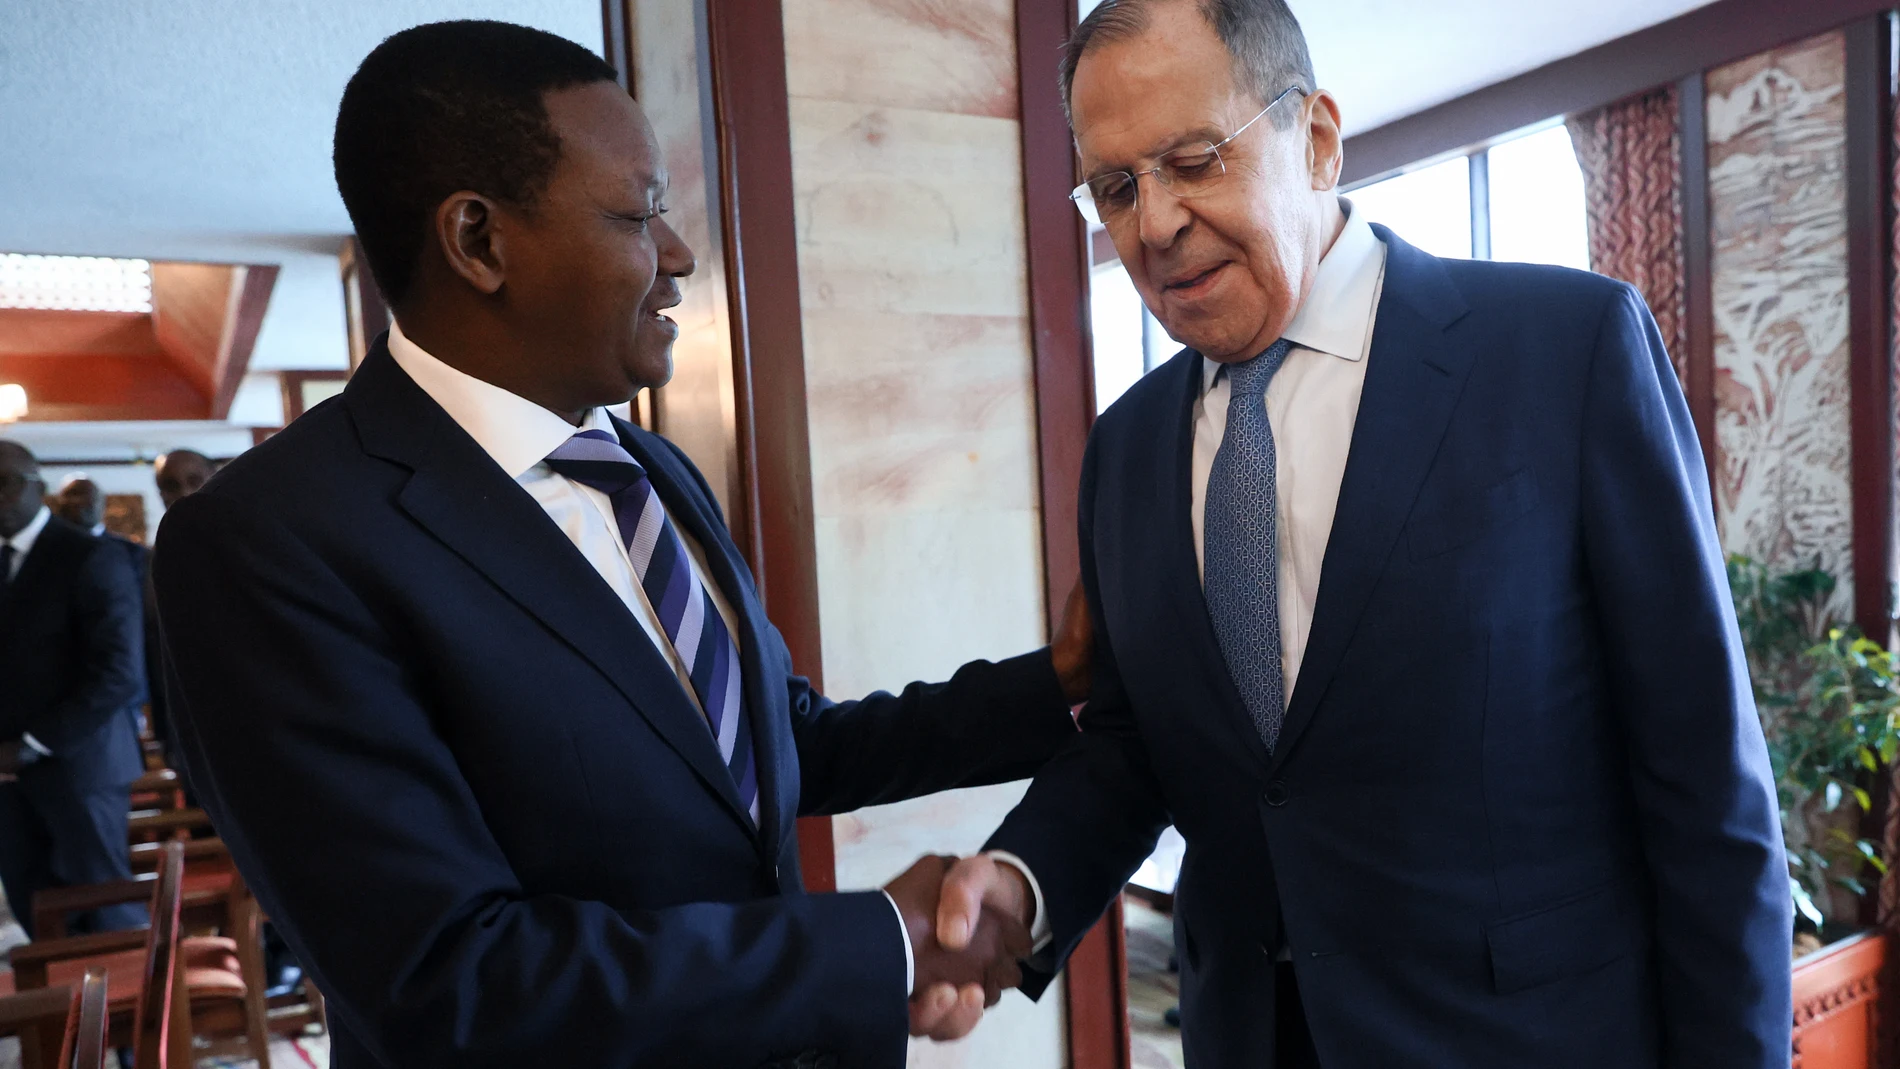 Nairobi (Kenya), 29/05/2023.- A handout picture made available by Russian Foreign ministry press service shows Russian Foreign Minister Russian Foreign Minister Sergei Lavrov (R) shakes hands with Alfred Mutua (L), Cabinet Secretary for Foreign and Diaspora Affairs of Kenya, during their meeting in Nairobi, Kenya, 29 May 2023. Lavrov is on a working visit to Kenya. Russian Foreign Minister had said on 18 May a mission of African countries plans to visit Russia by mid-June - early July to look for ways to peacefully resolve the conflict in Ukraine. (Kenia, Rusia, Ucrania) EFE/EPA/RUSSIAN FOREIGN MINISTRY PRESS SERVICE / HANDOUT HANDOUT EDITORIAL USE ONLY/NO SALES 